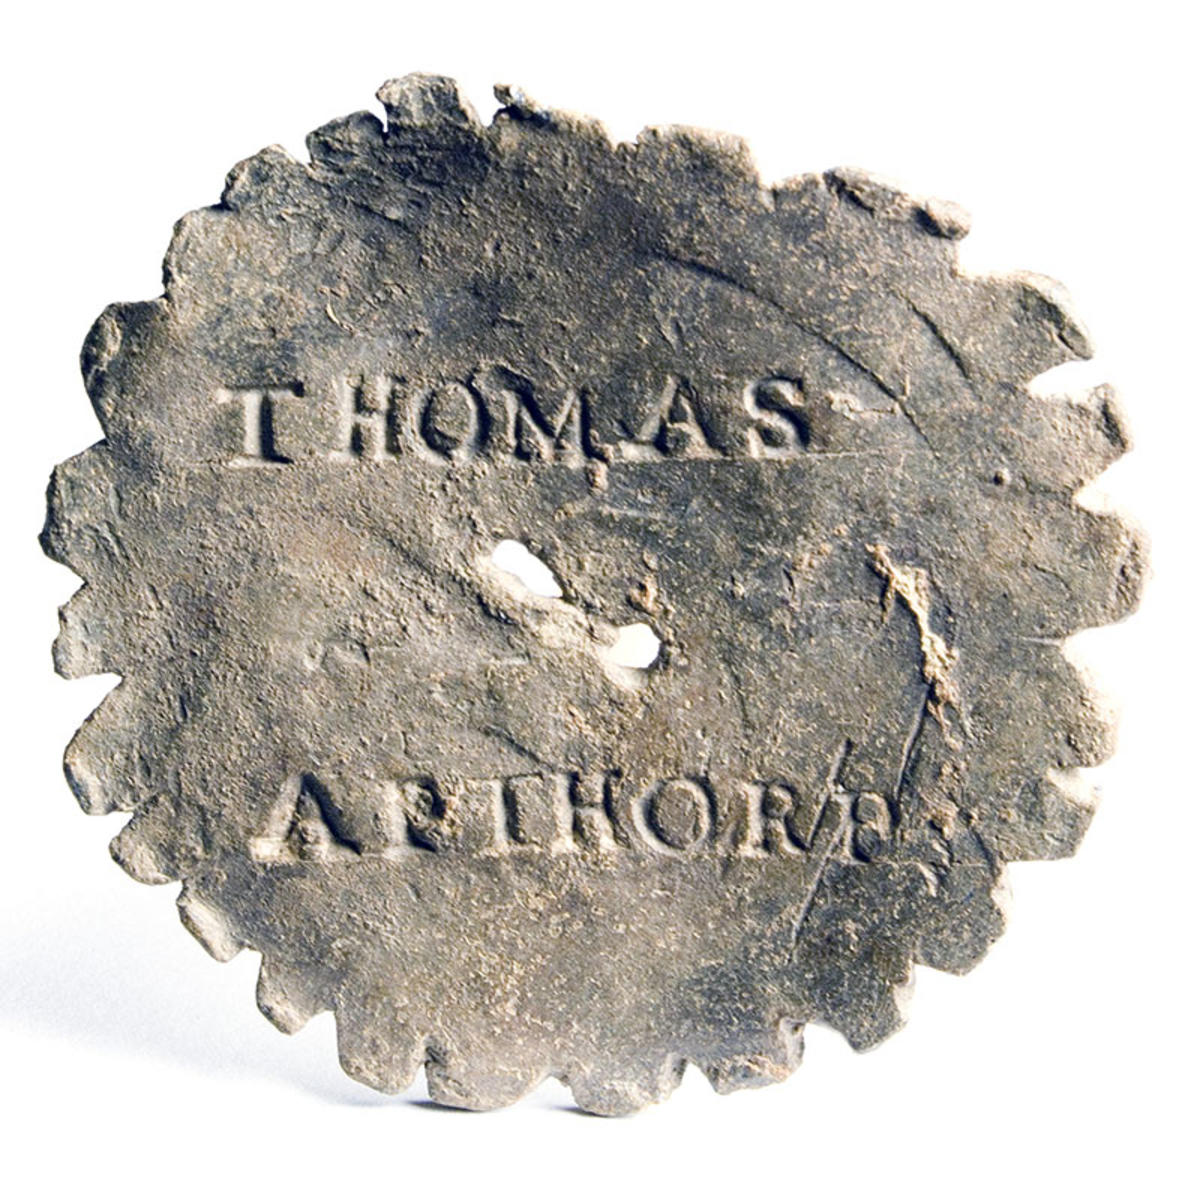 A lead whizzer toy with the name Thomas Apthorp stamped into the front